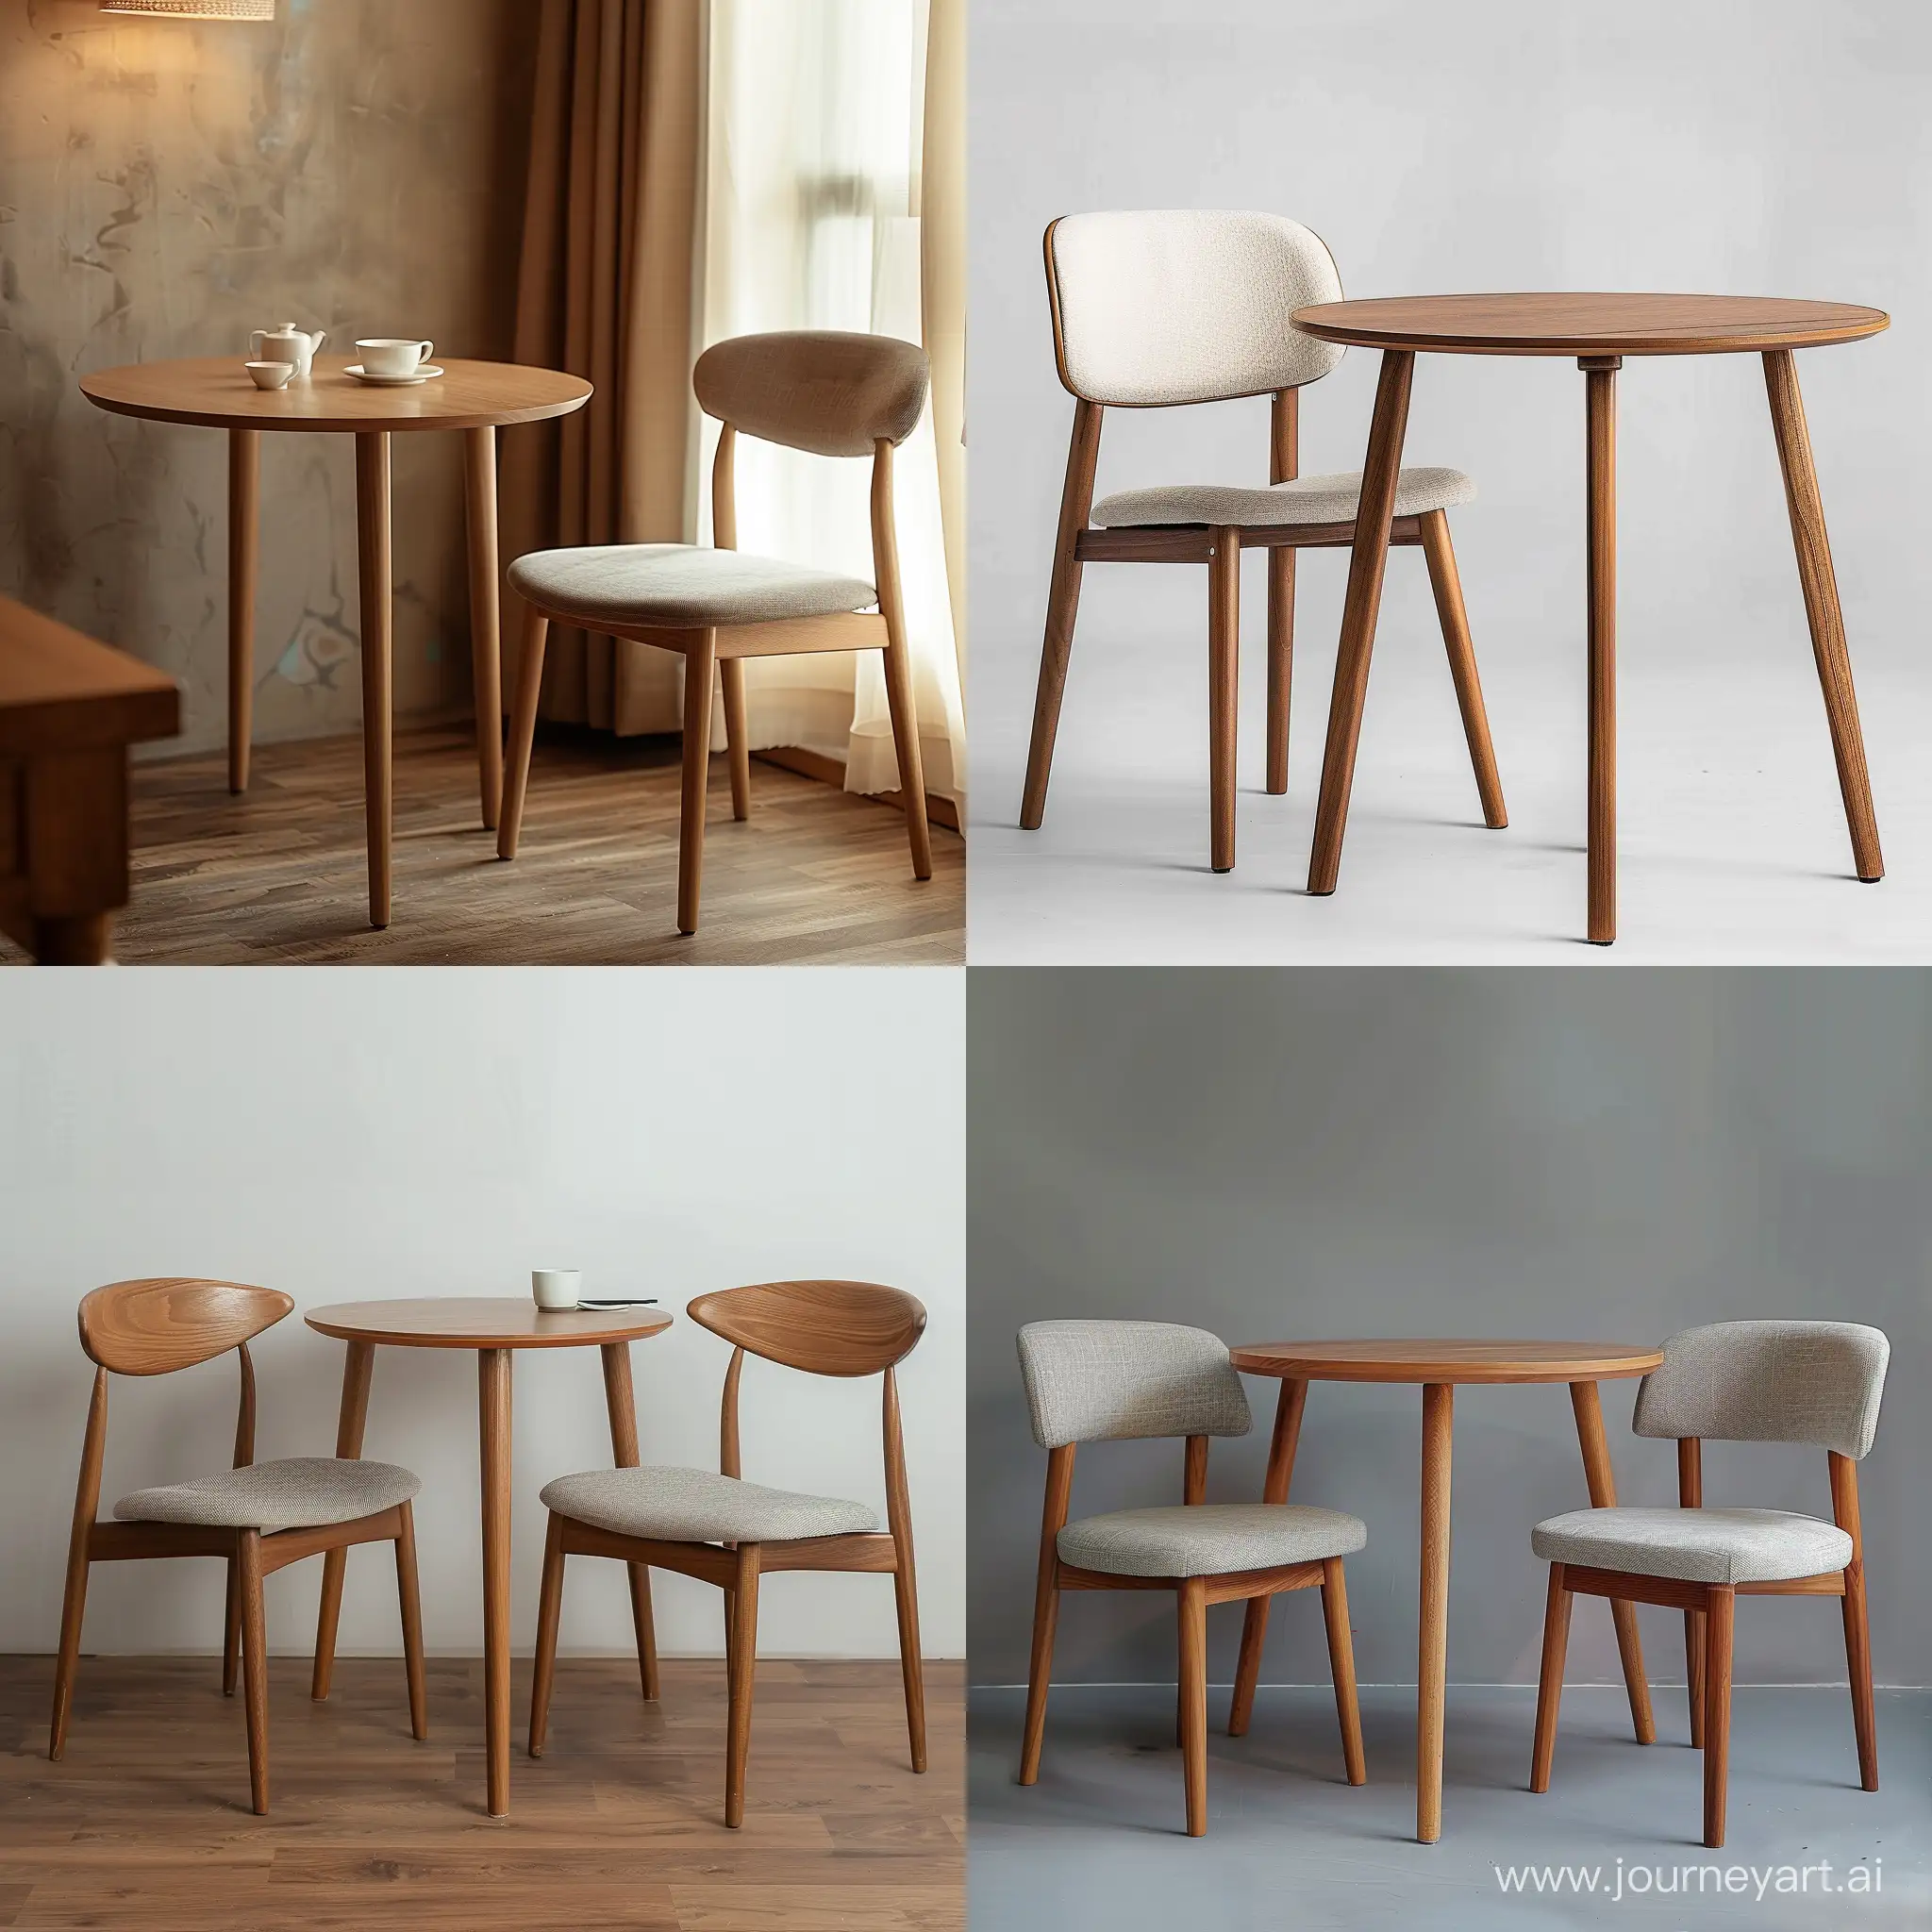 Enter a description of the picture you want to generate. For example: Simple dining chair and table in the style of Japandi,scandi,mid-century,comfortable,light,concise,tactile,good-natured,modern, wood, solid, soft fabric seat elements